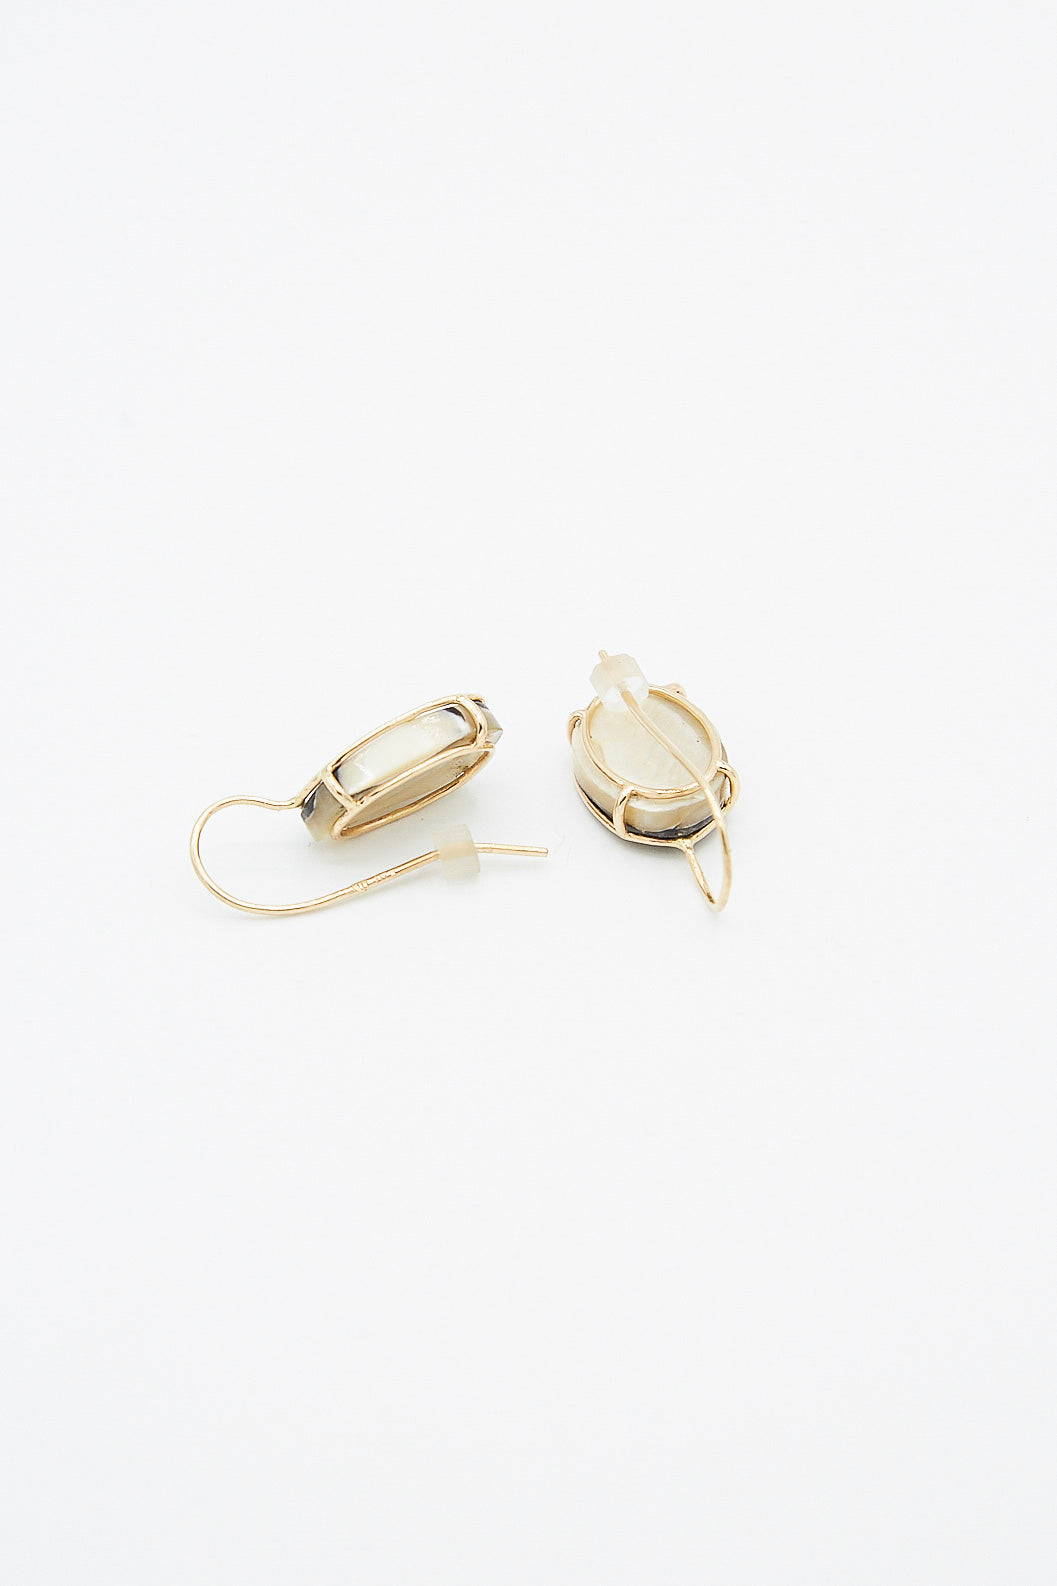 Handmade Mary MacGill 14K gold-plated earrings in Cowrie Shell design, beautifully displayed on a white surface. Back side view.